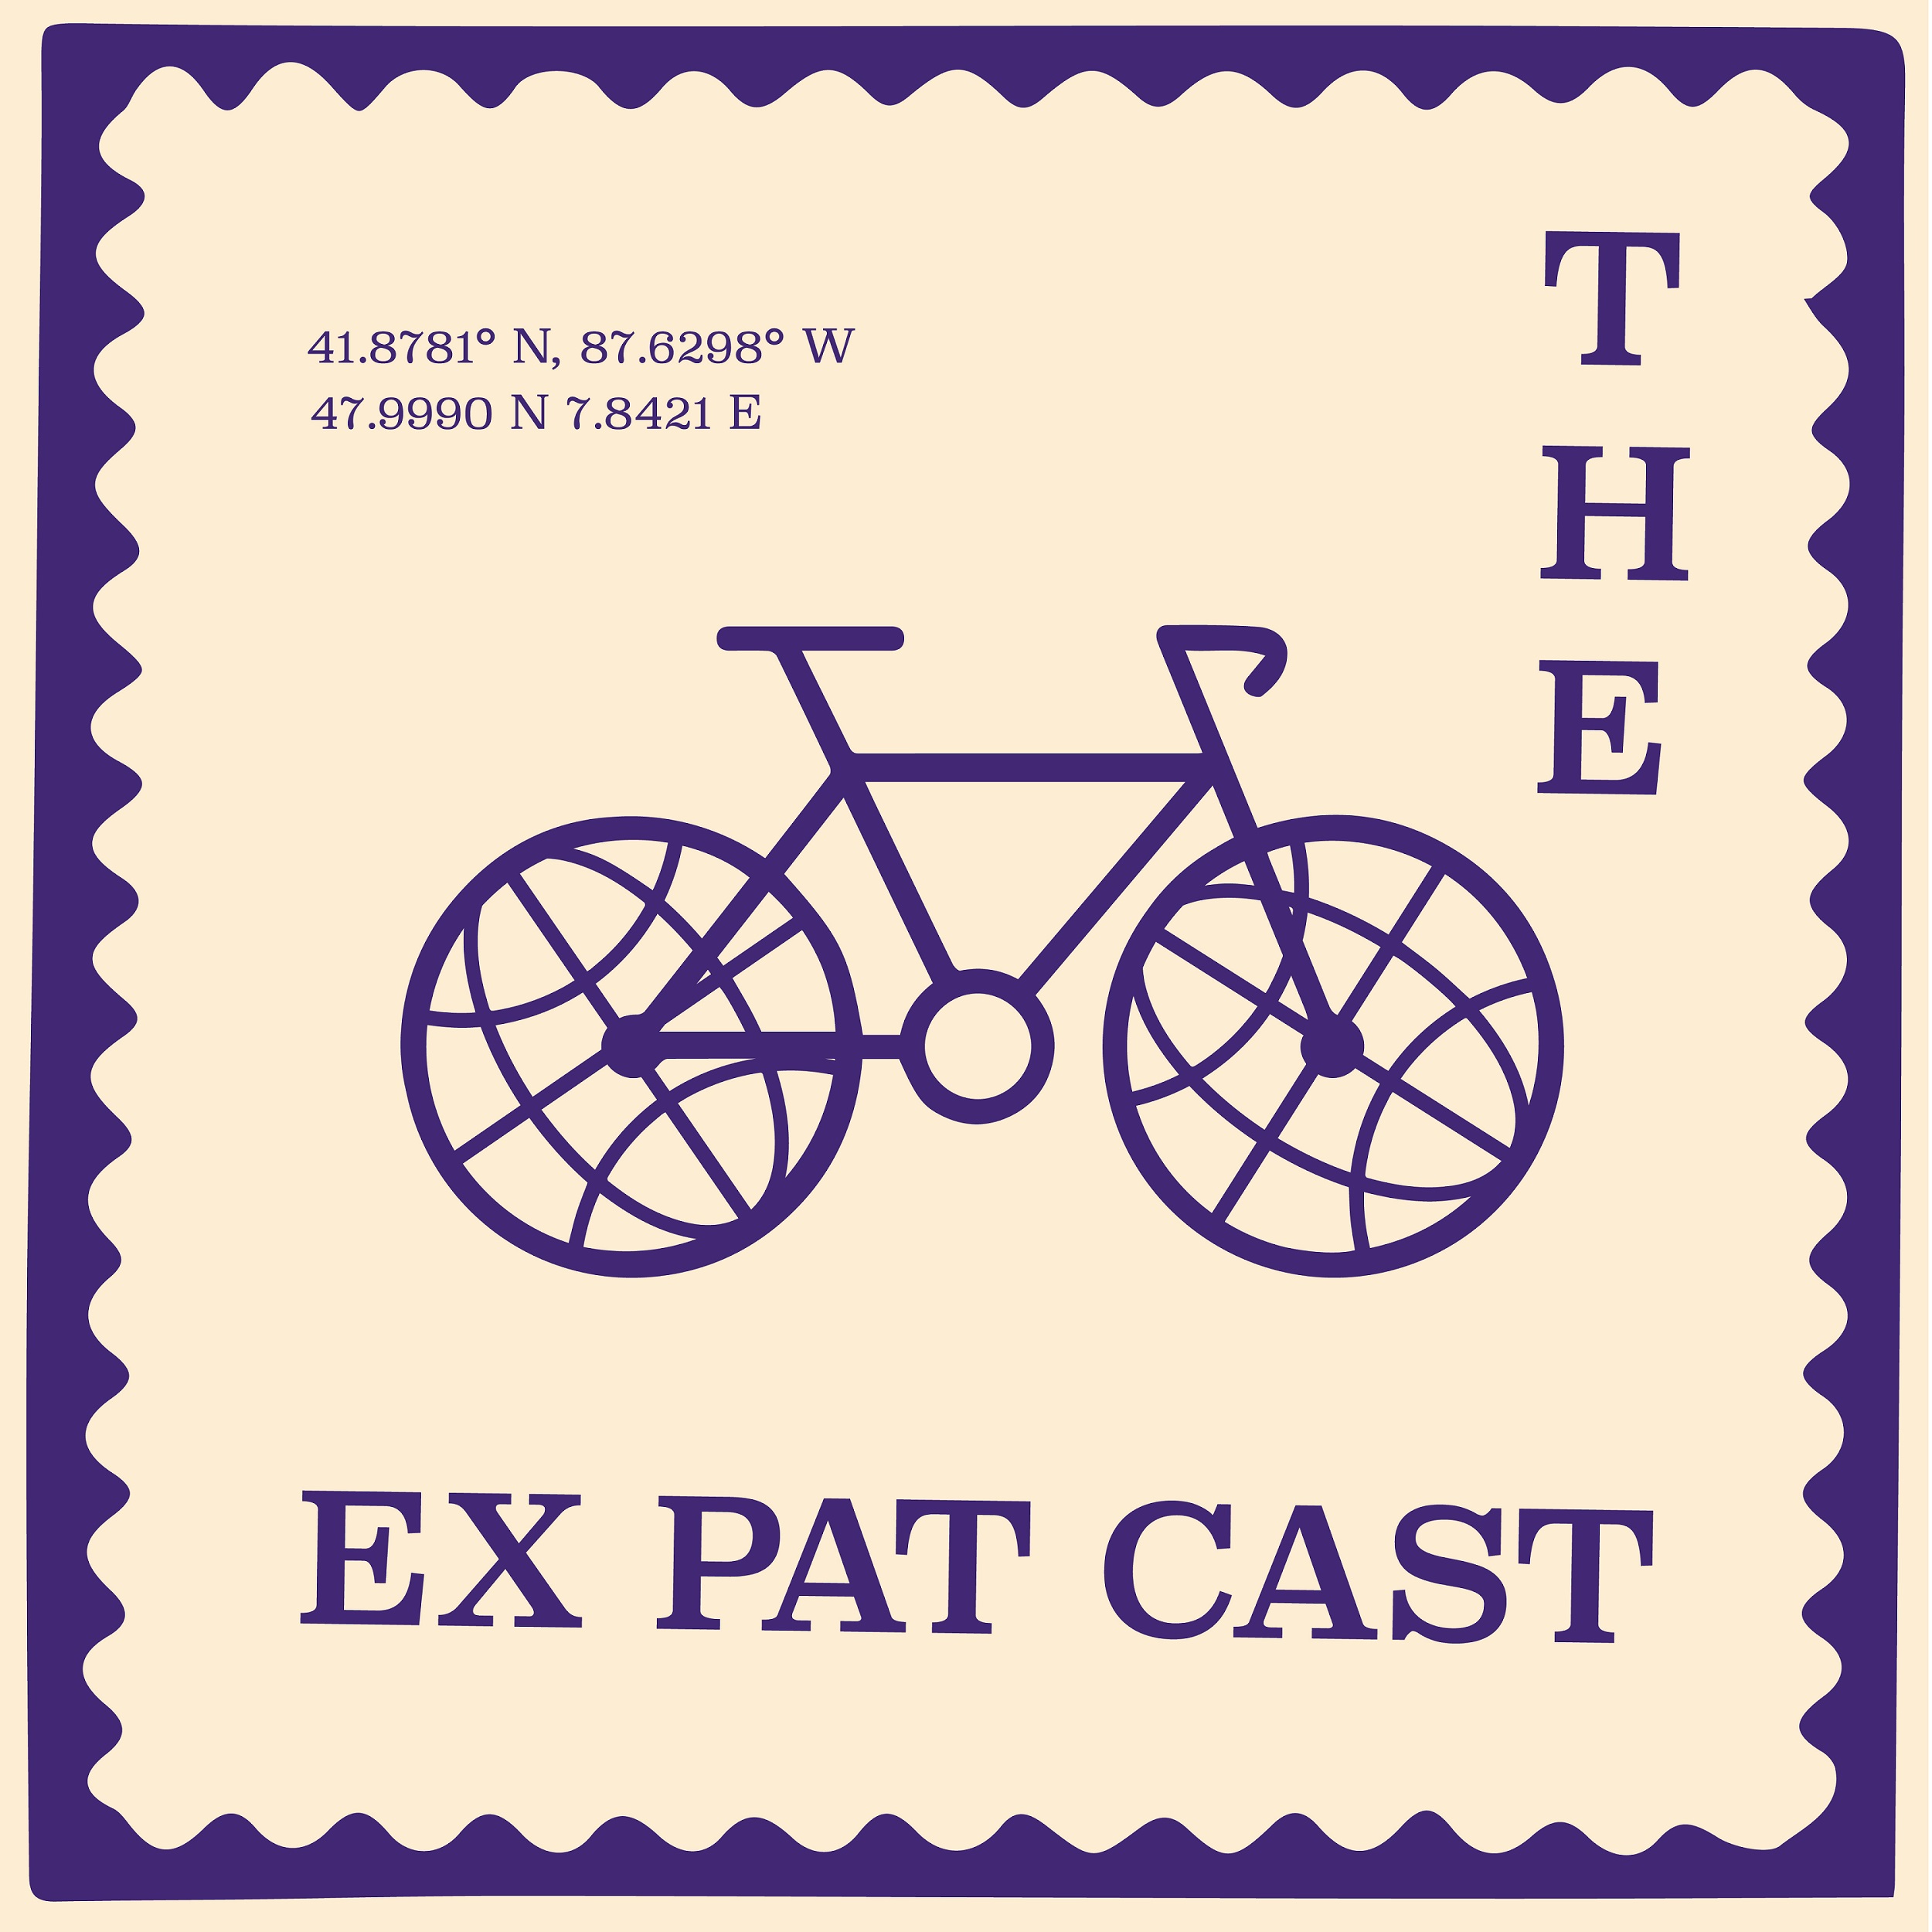 The Expat Cast - a podcast about expats by American Nicole living in Germany.